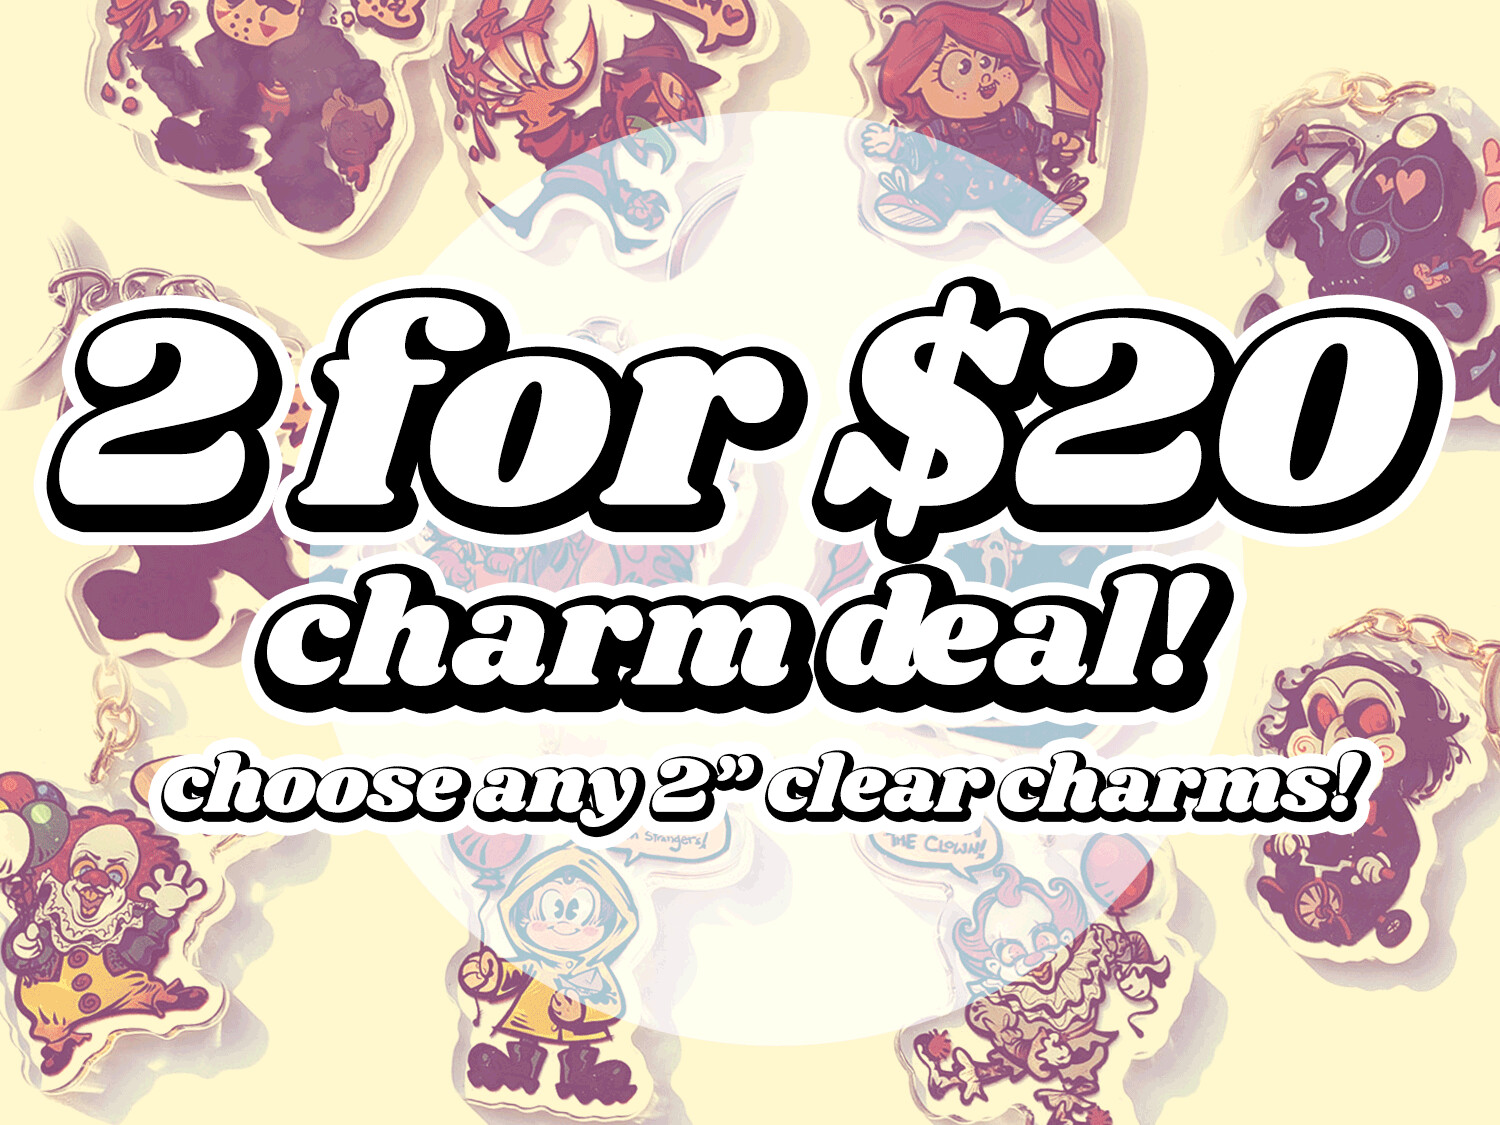 Mix n' Match! 2 charms for $20